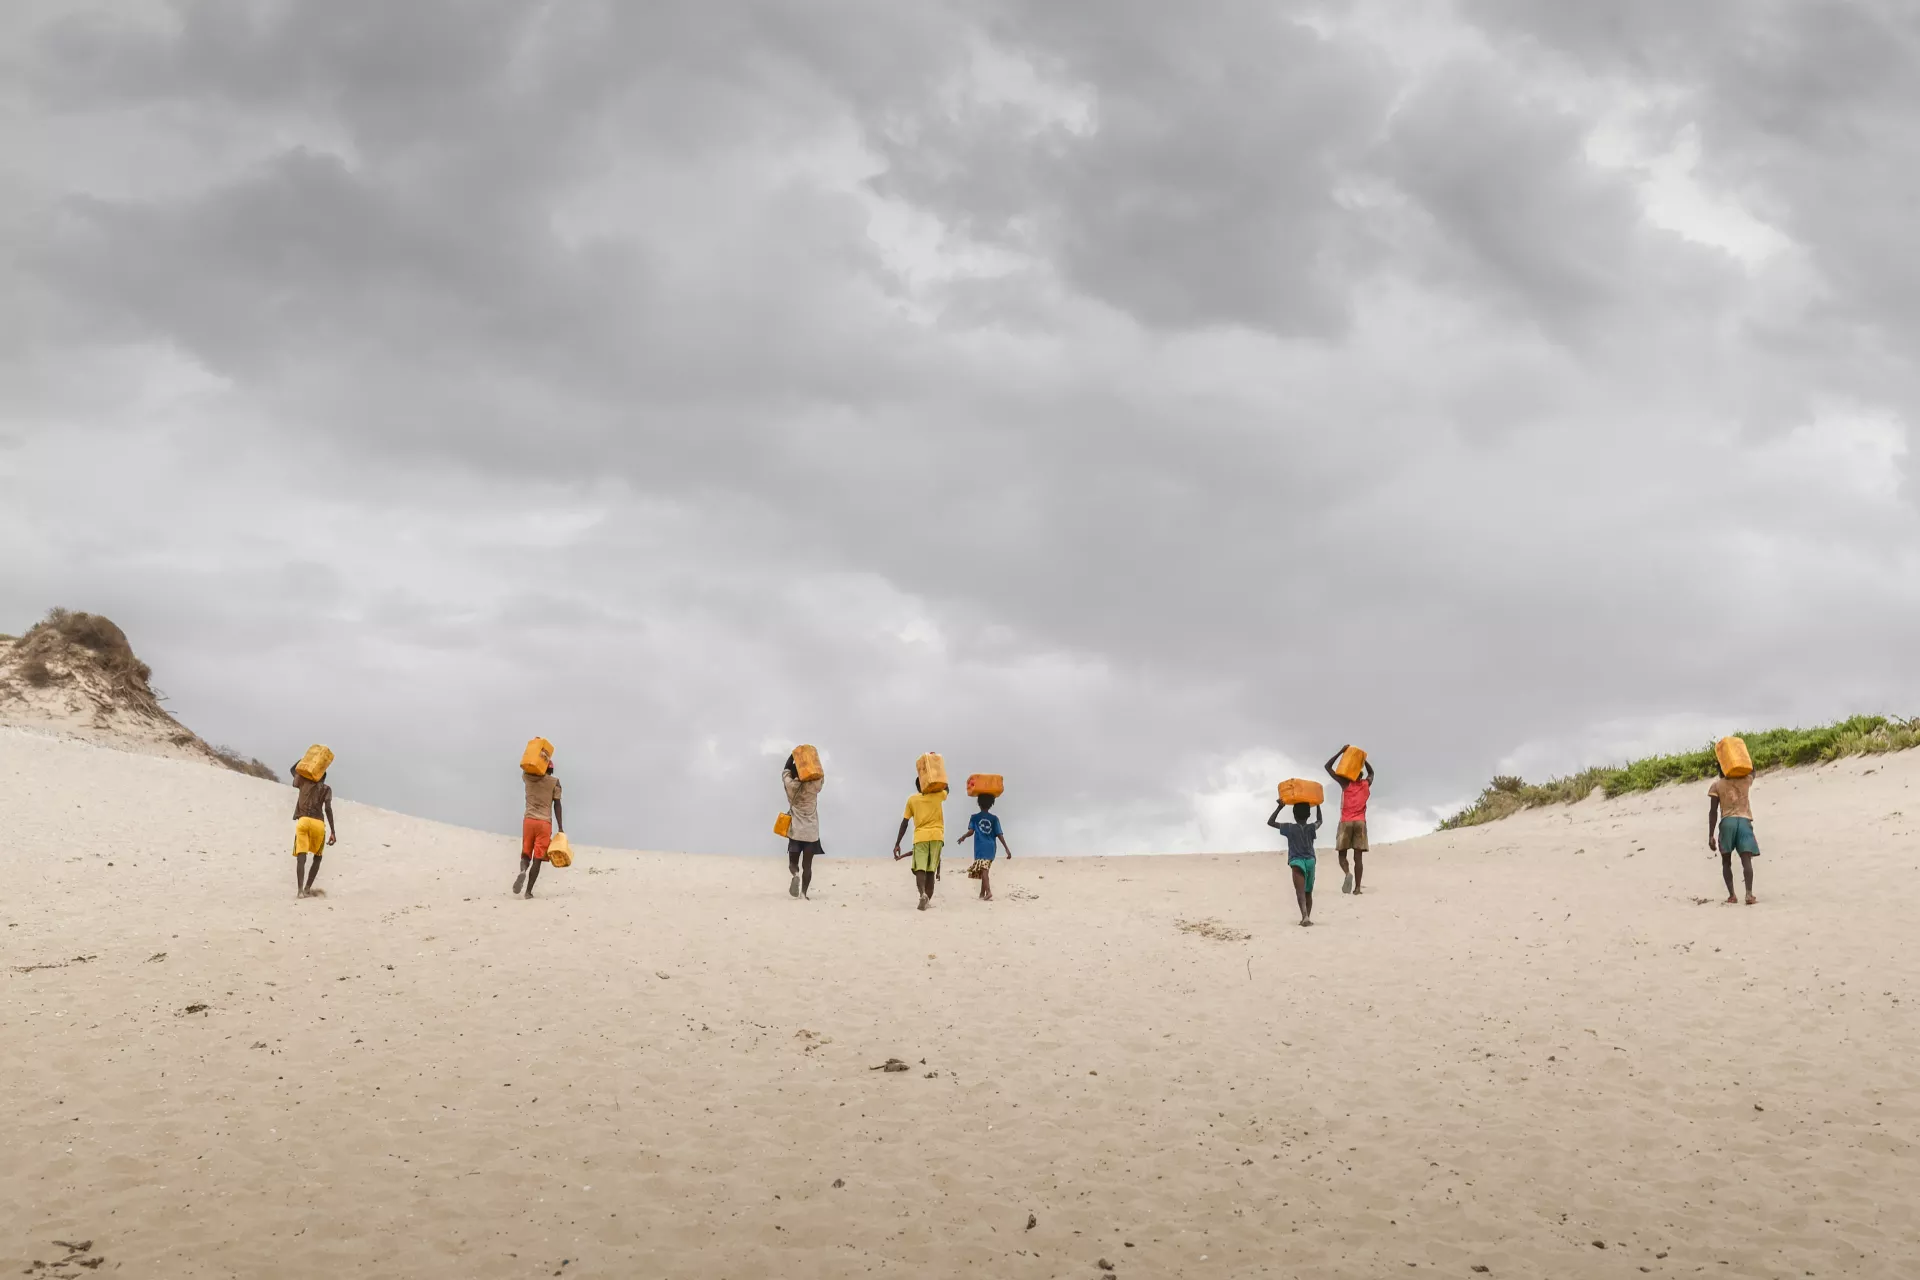 Children walk on sand carrying water